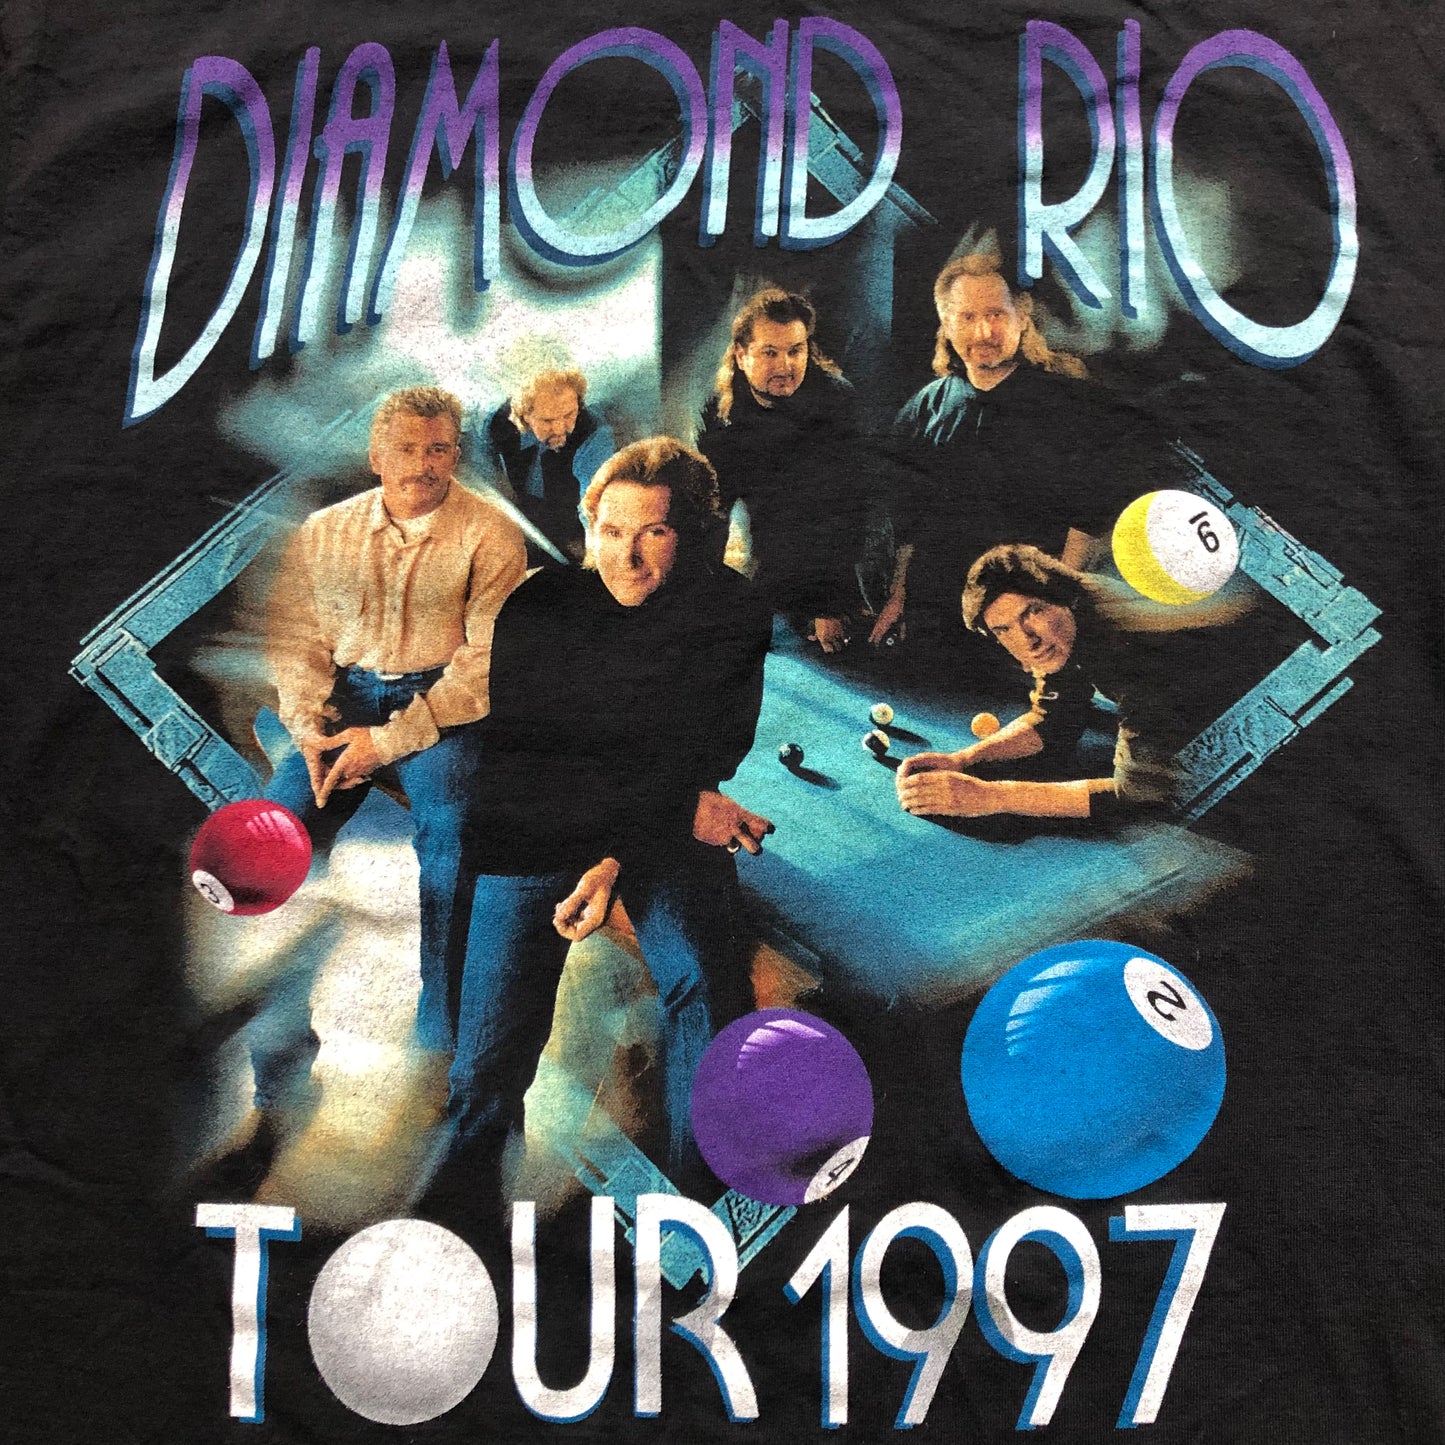 1997 Vintage Diamond Rio Country Concert Tour T-Shirt | Made in USA